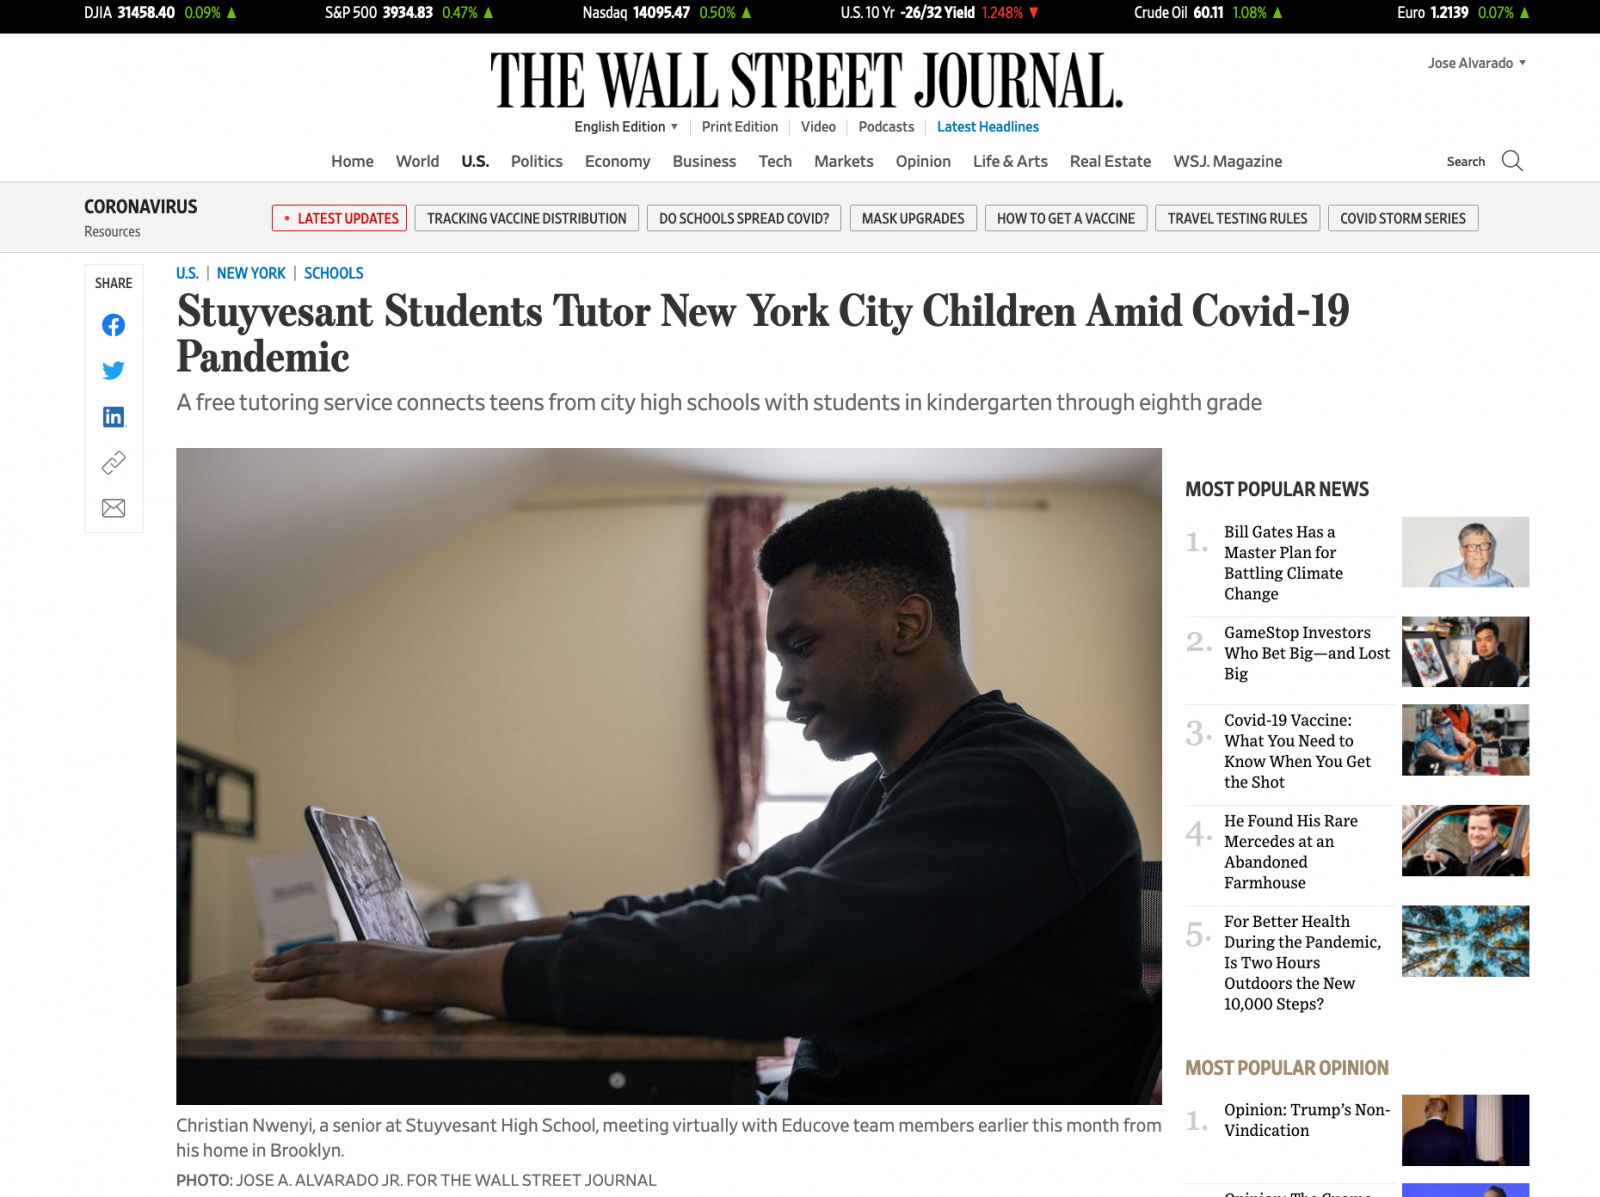 for The Wall Street Journal: Stuyvesant Students Tutor New York City Children Amid Covid-19 Pandemic 